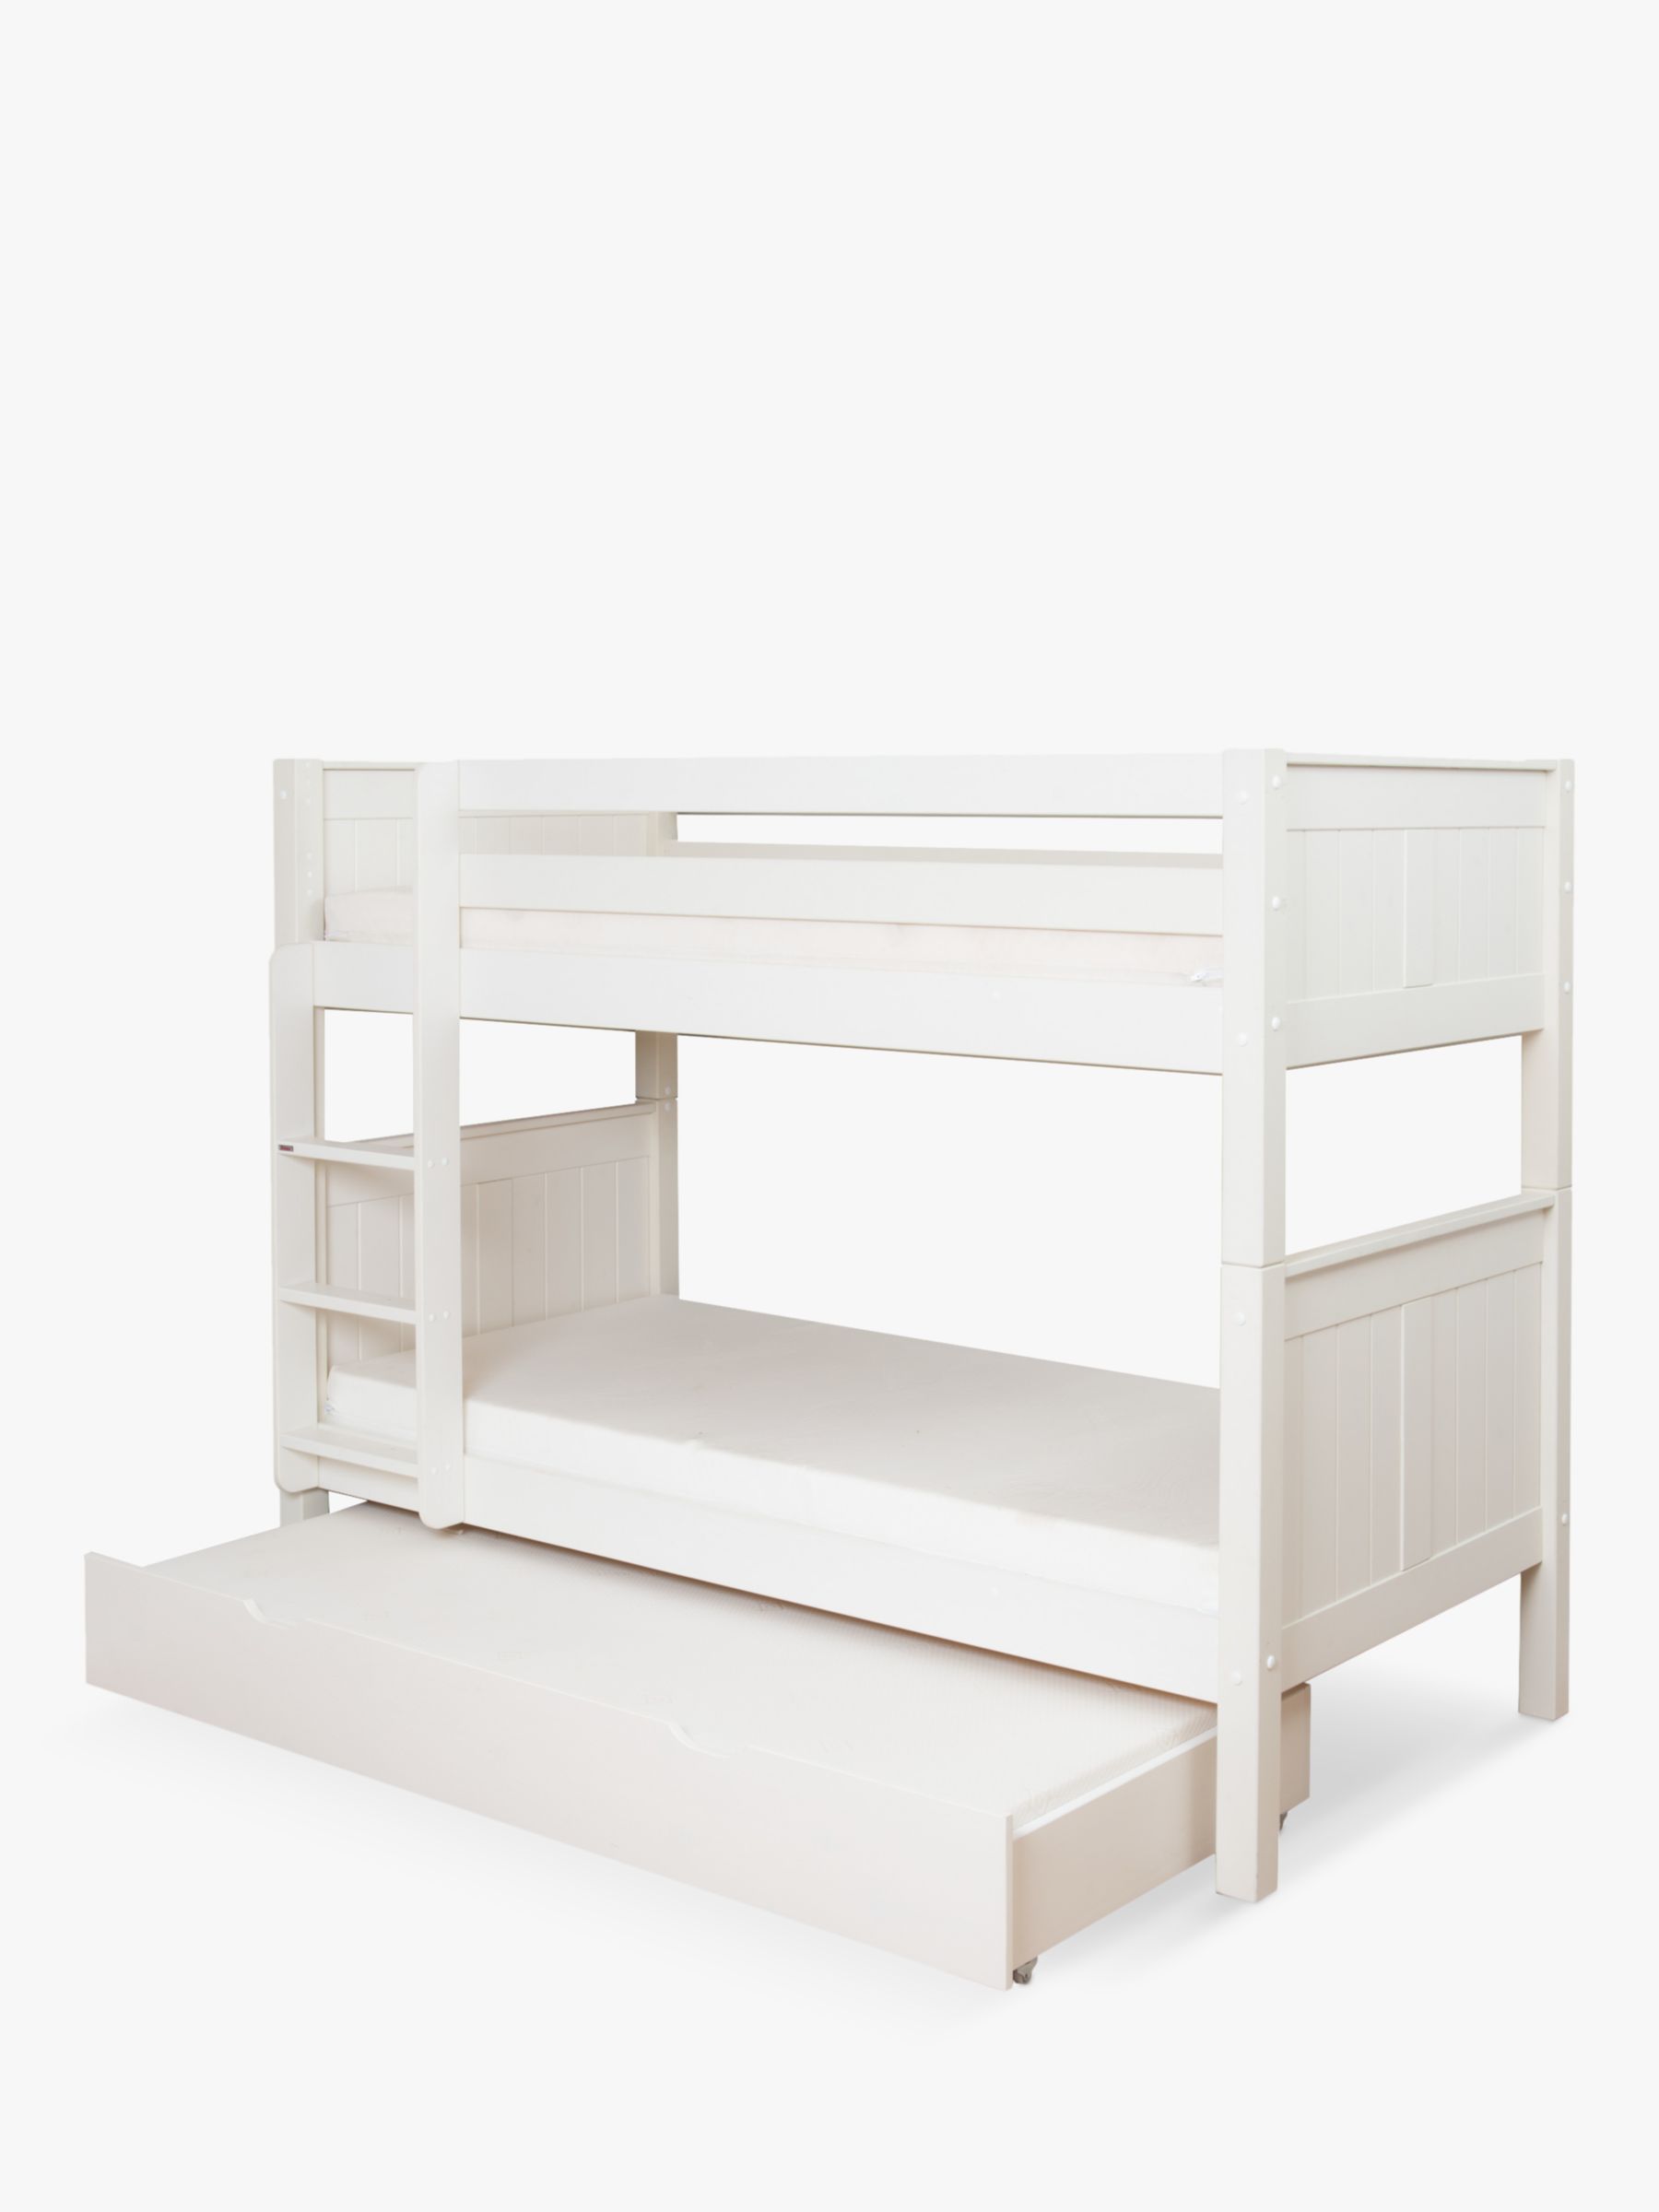 Stompa Classic Child Compliant Bunk Bed, Are Bunk Beds Good For Toddlers